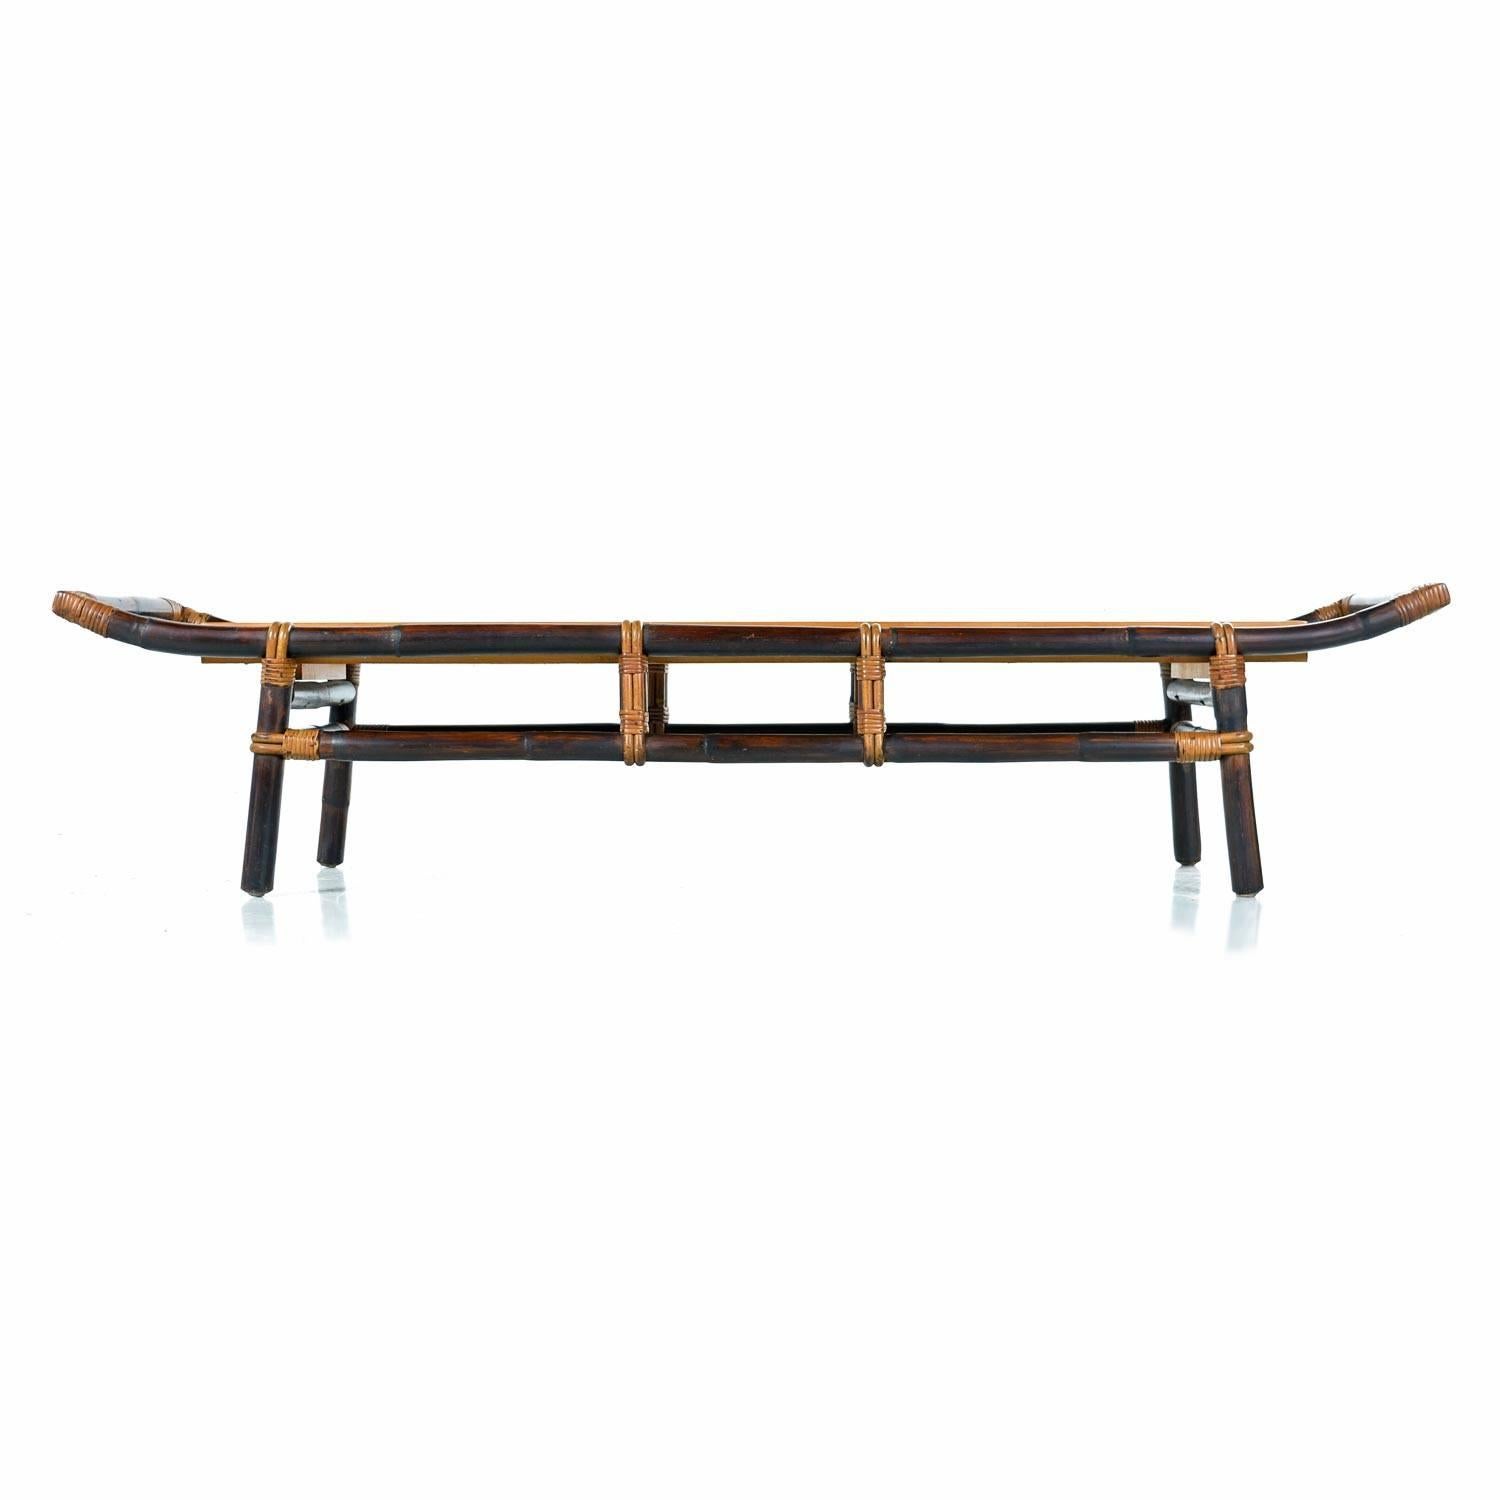 This unique bamboo and rattan pagoda style coffee table was designed by John Wisner for Ficks Reed, circa 1950s. John Wisner graduated from Parsons School Of Design in 1935 and designed for both private clients, and corporate clients including